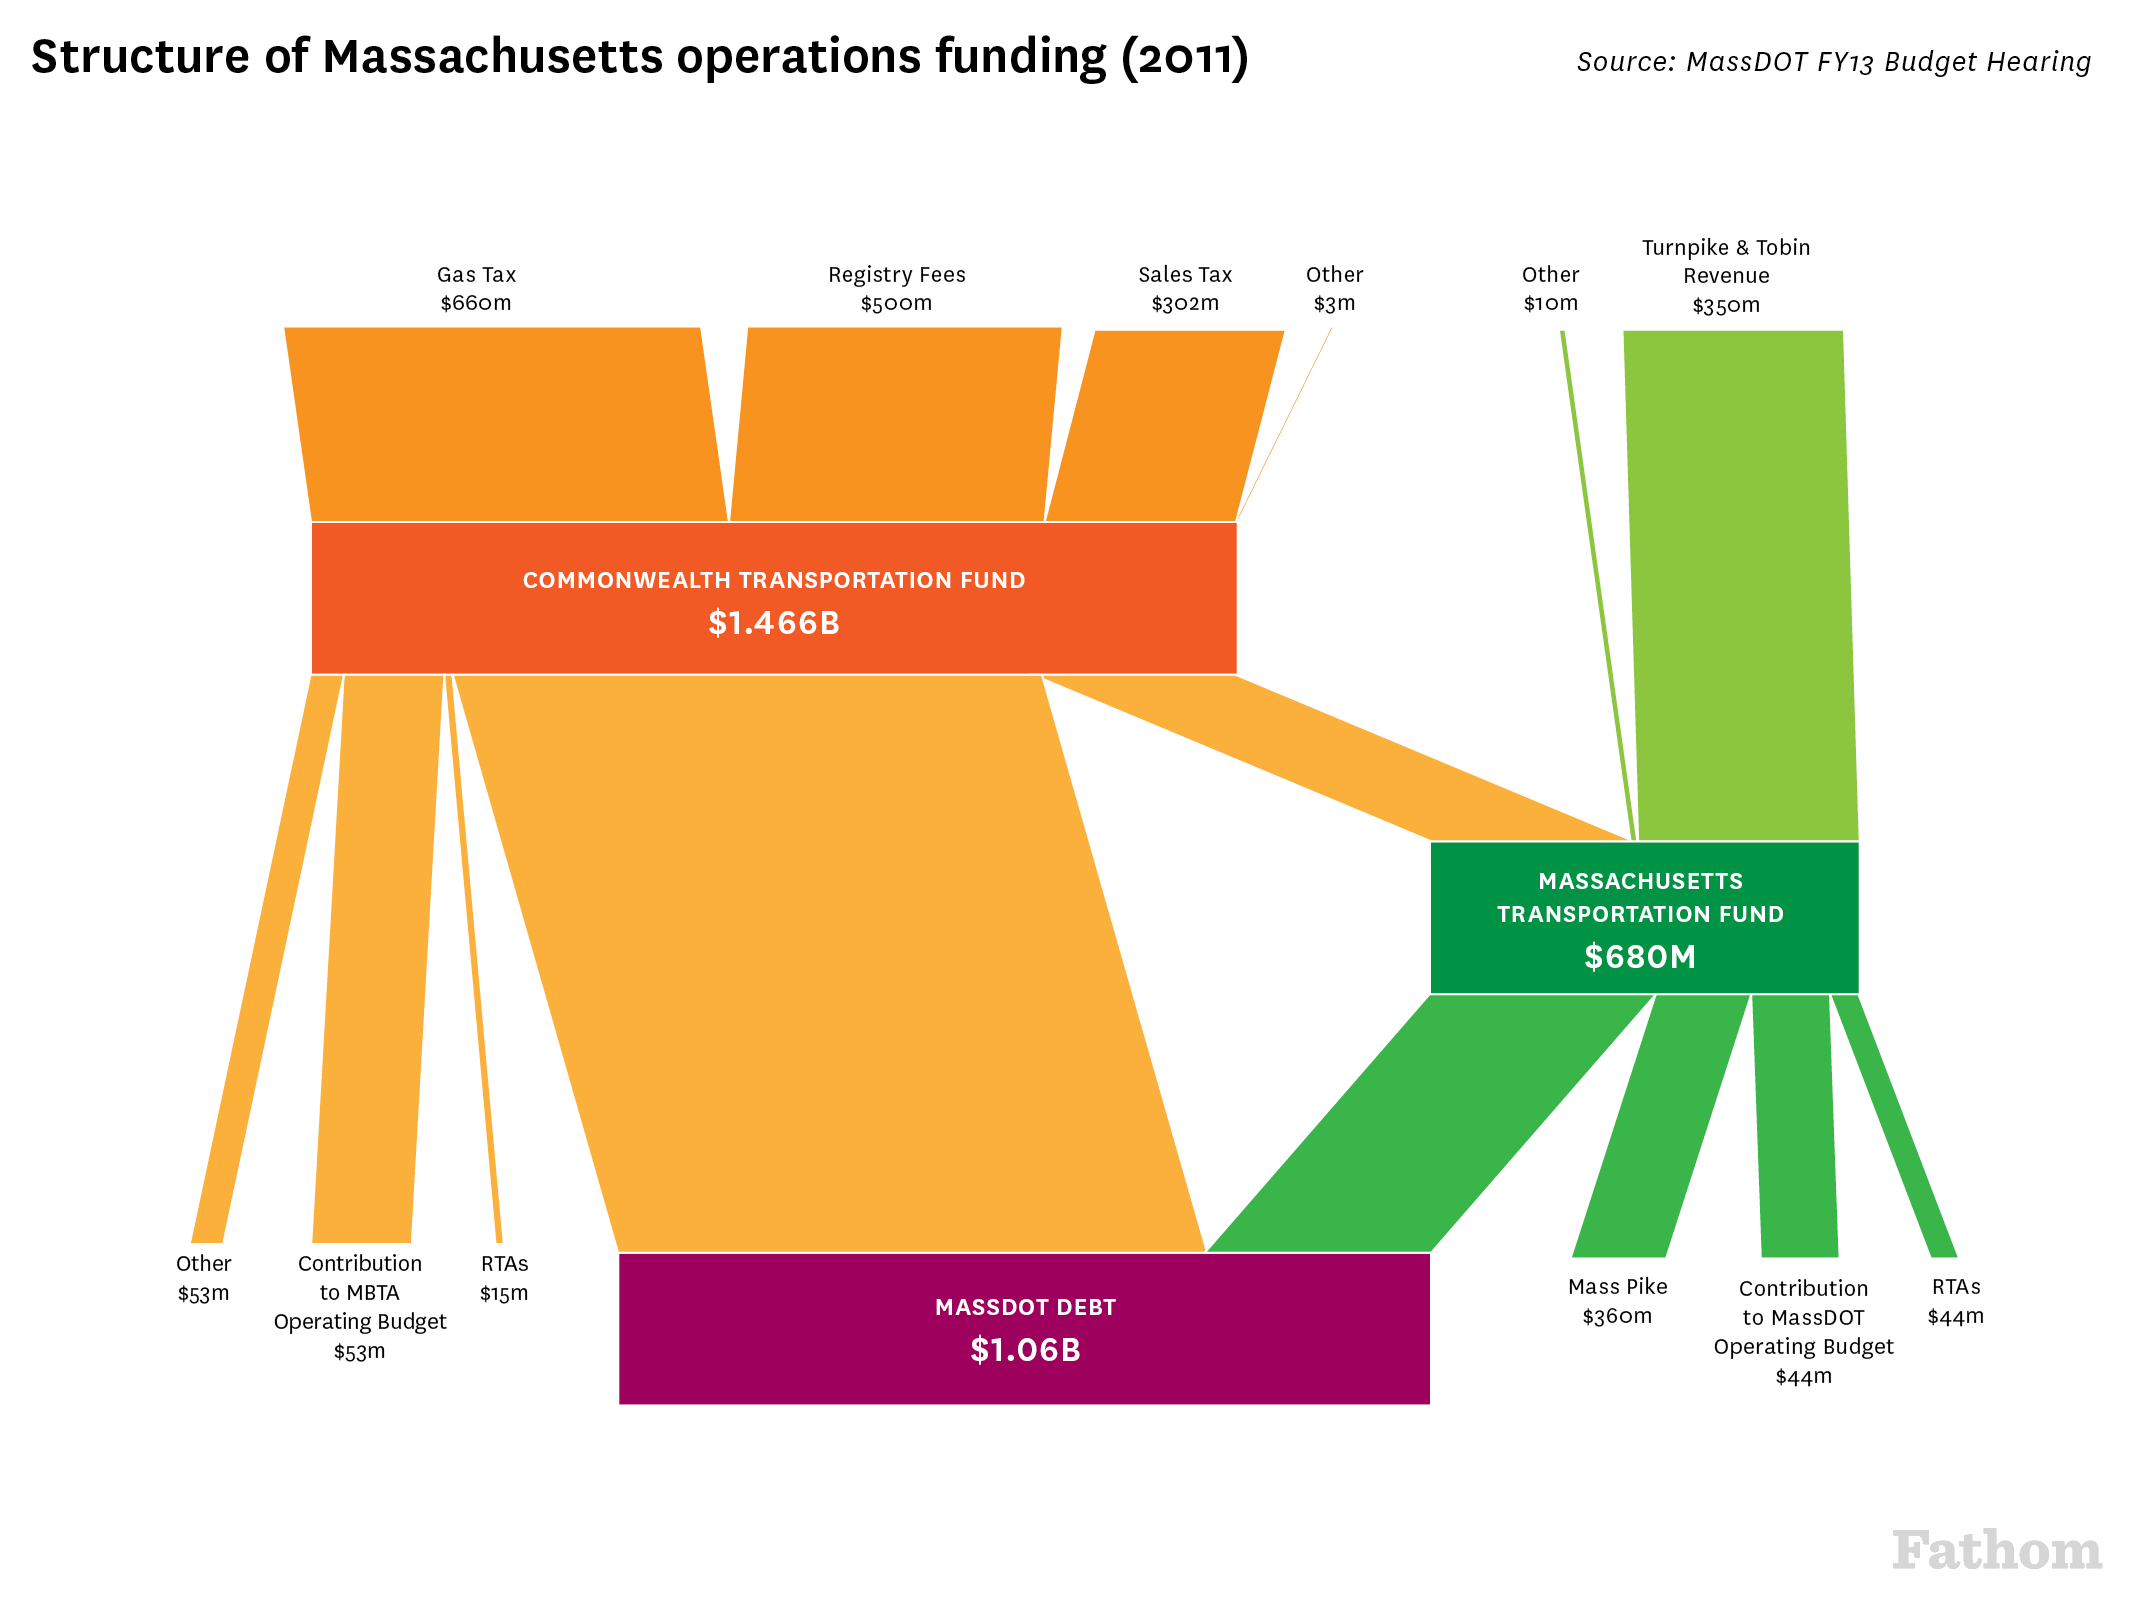 The Commonwealth Transportation Fund (CTF) is subject to appropriation by the MA legislature, which mandates that revenues be put toward debt before funding the MBTA or the RTAs. In the past, this has meant that there is not enough funding left to maintain a state of good repair (SGR) within the Commonwealth's roads, bridges, and railways."